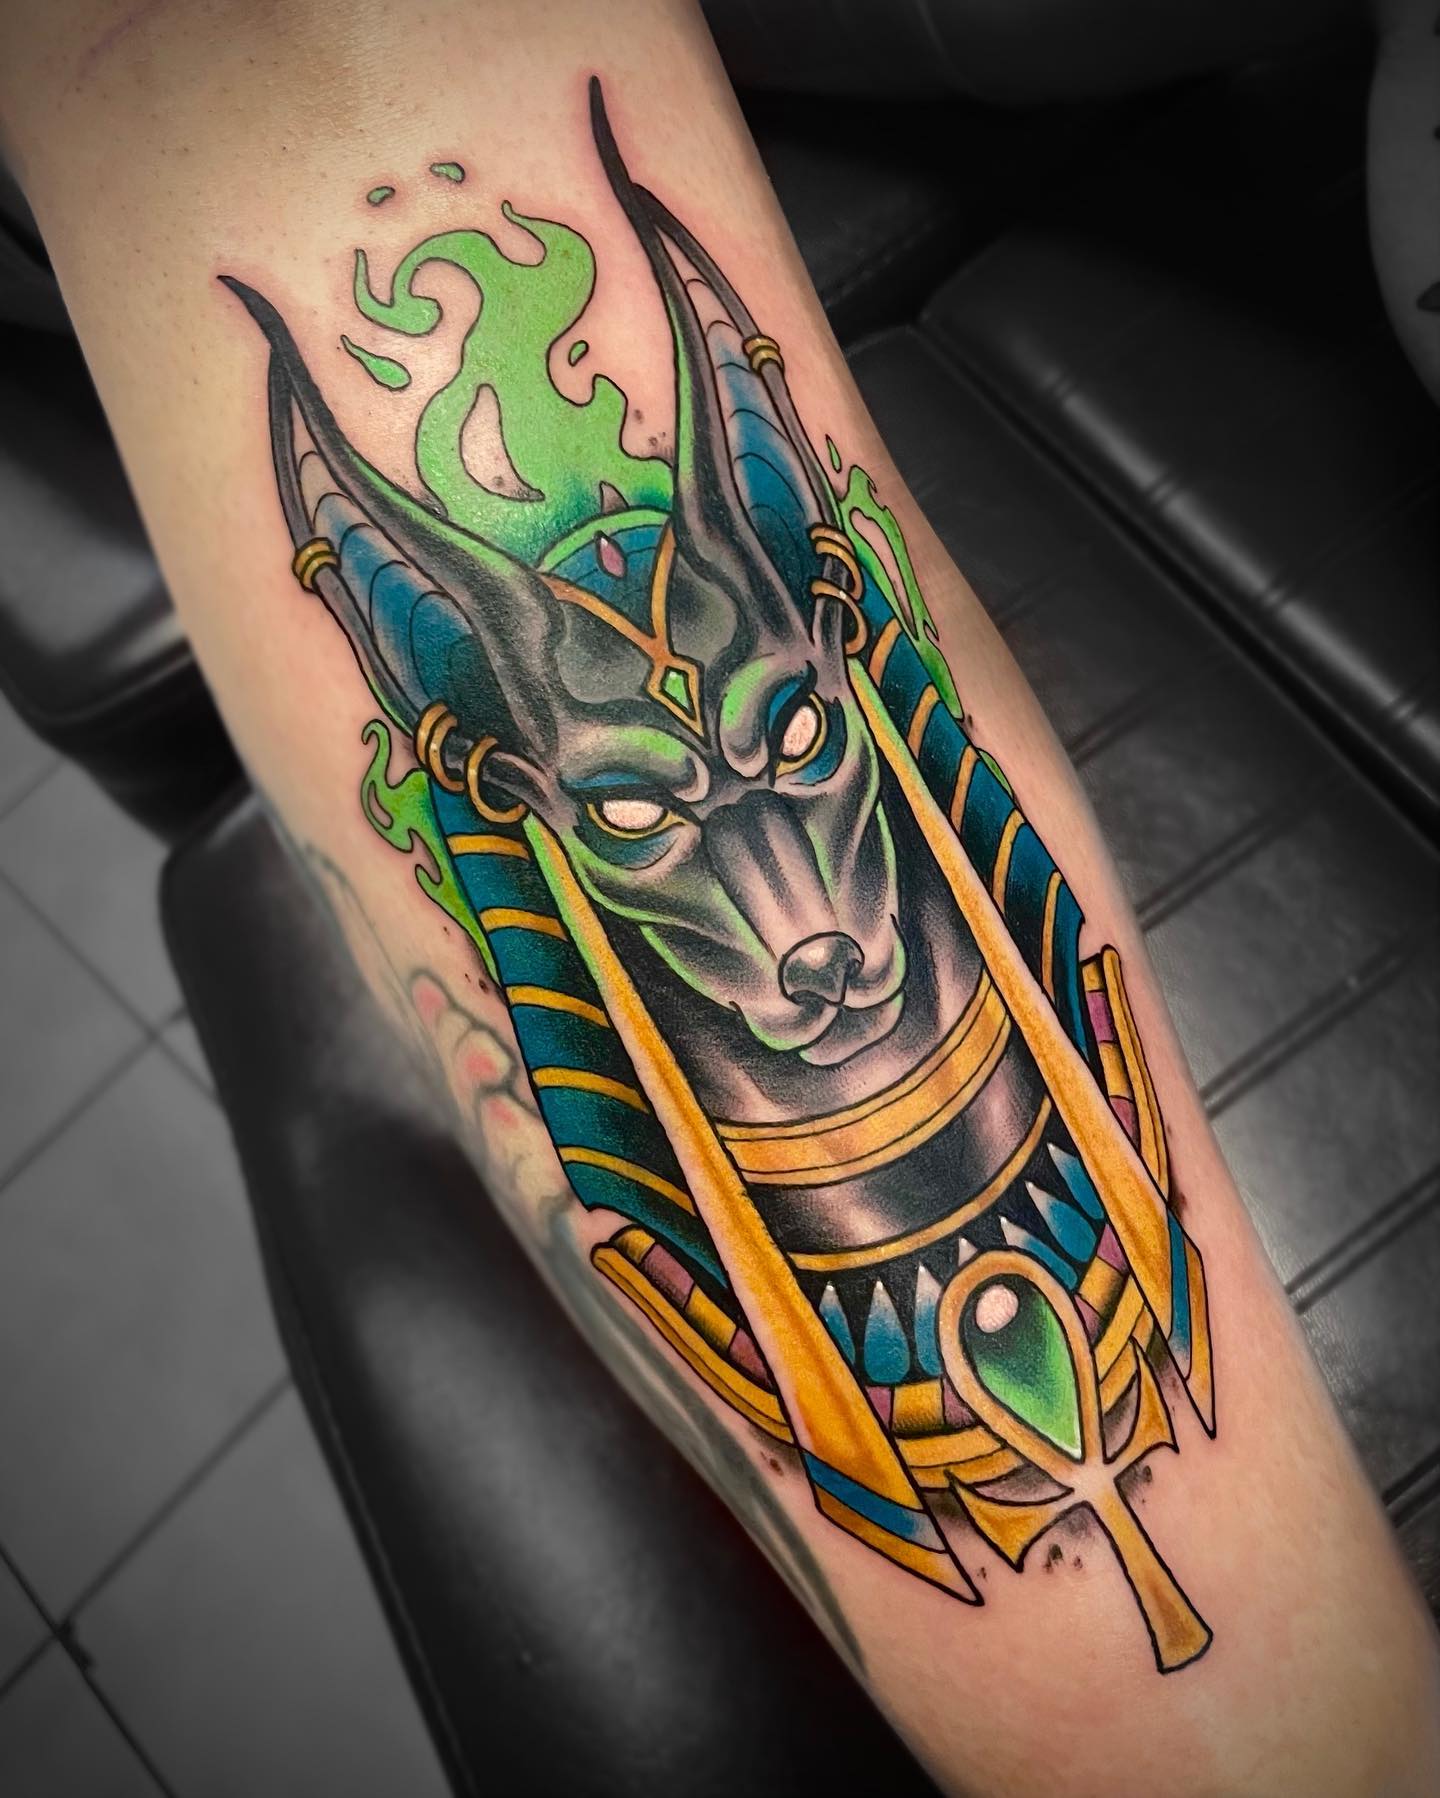 Anubis tattoo with colorful inks from green to yellow.